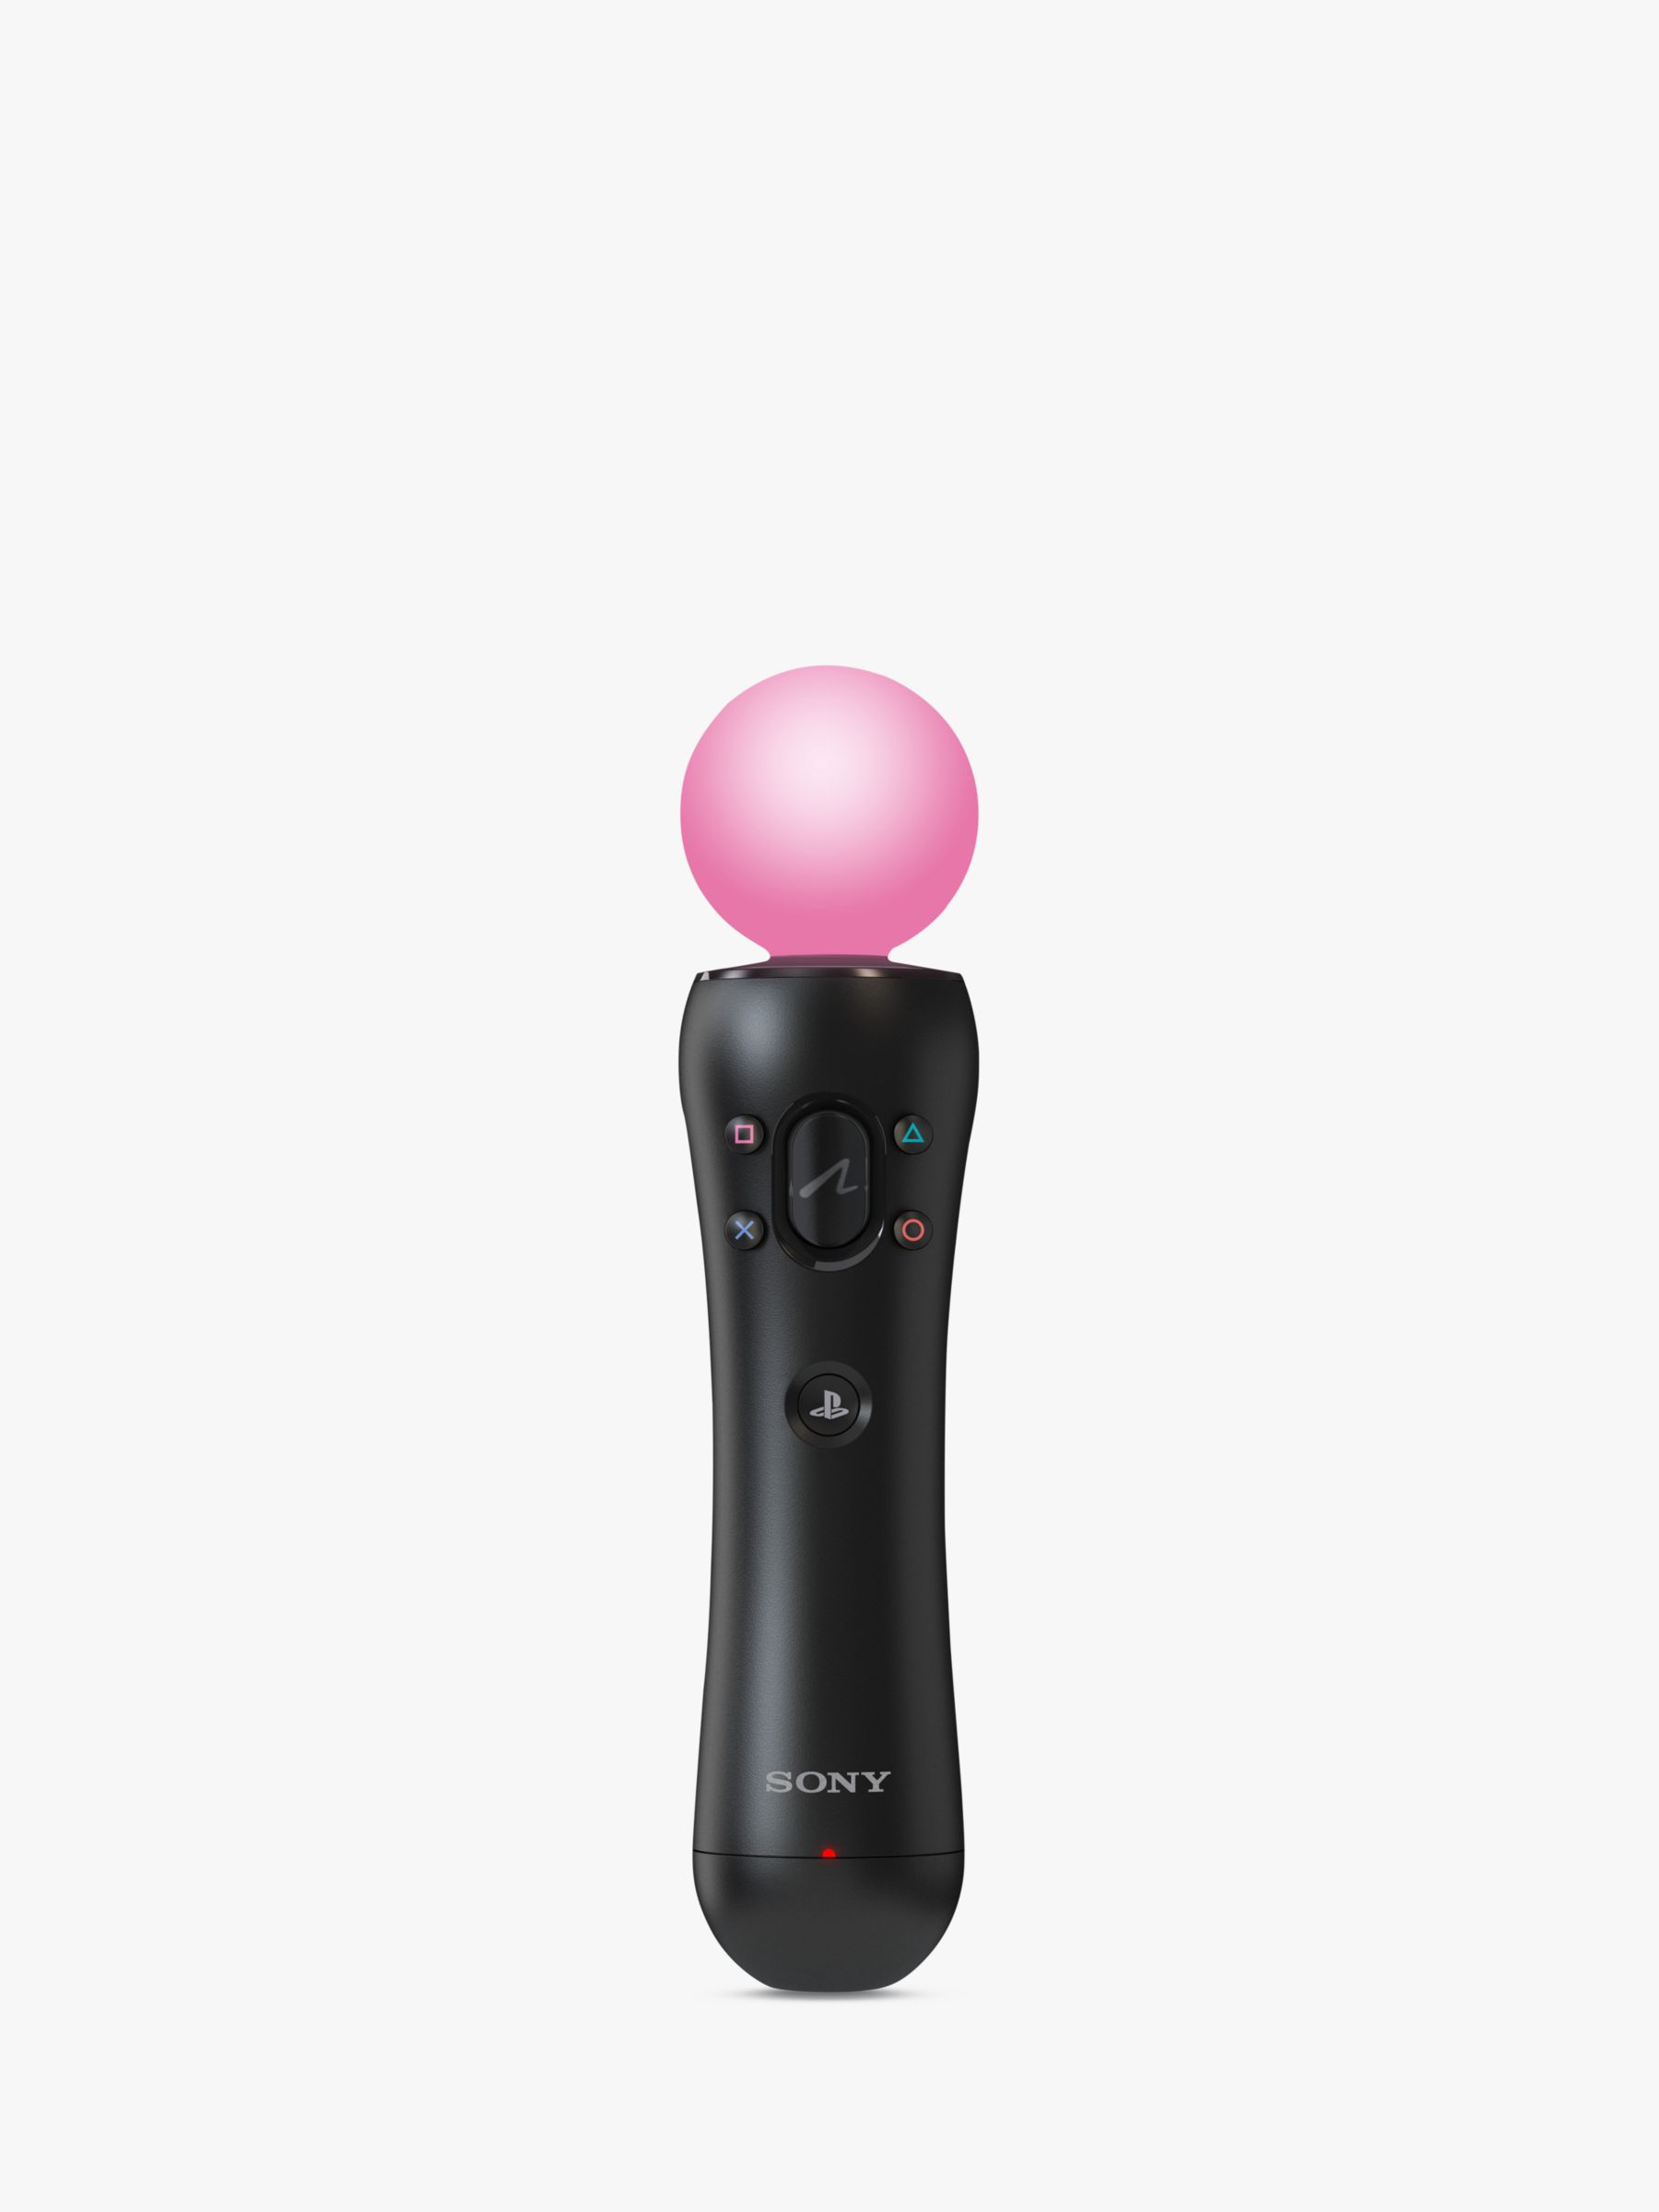 Playstation Cam Nude - Sony Playstation Move Controller For Ps4 And Ps Vr Headset | CLOUDY GIRL  PICS